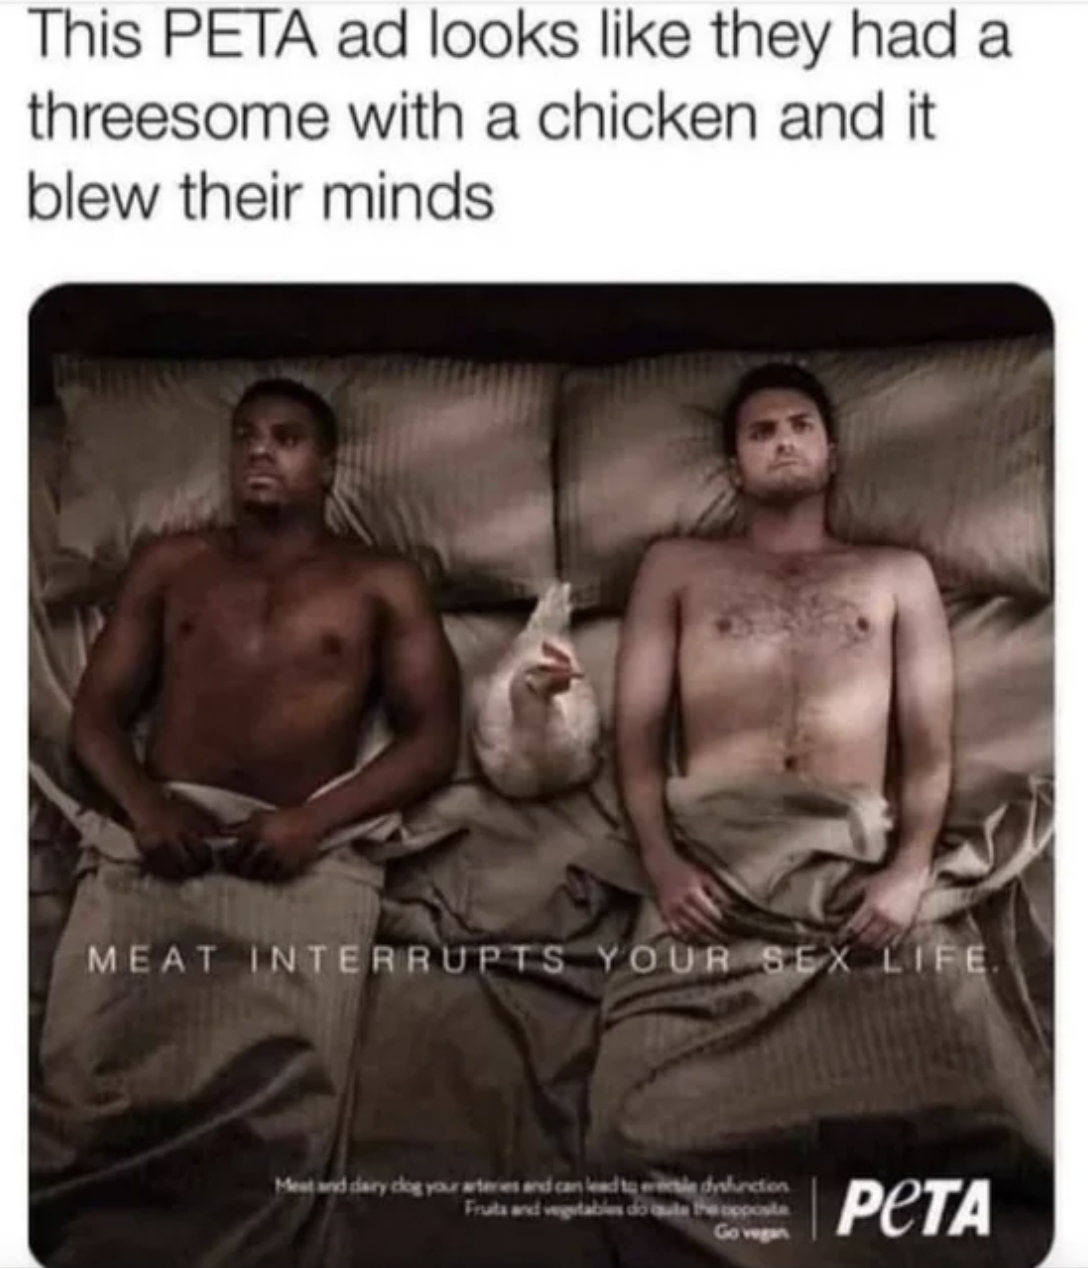 facepalms - peta chicken ad - This Peta ad looks they had a threesome with a chicken and it blew their minds Meat Interrupts Your Sex Life. Mtdary dig Frute and Inten Peopocate Go vegan Peta